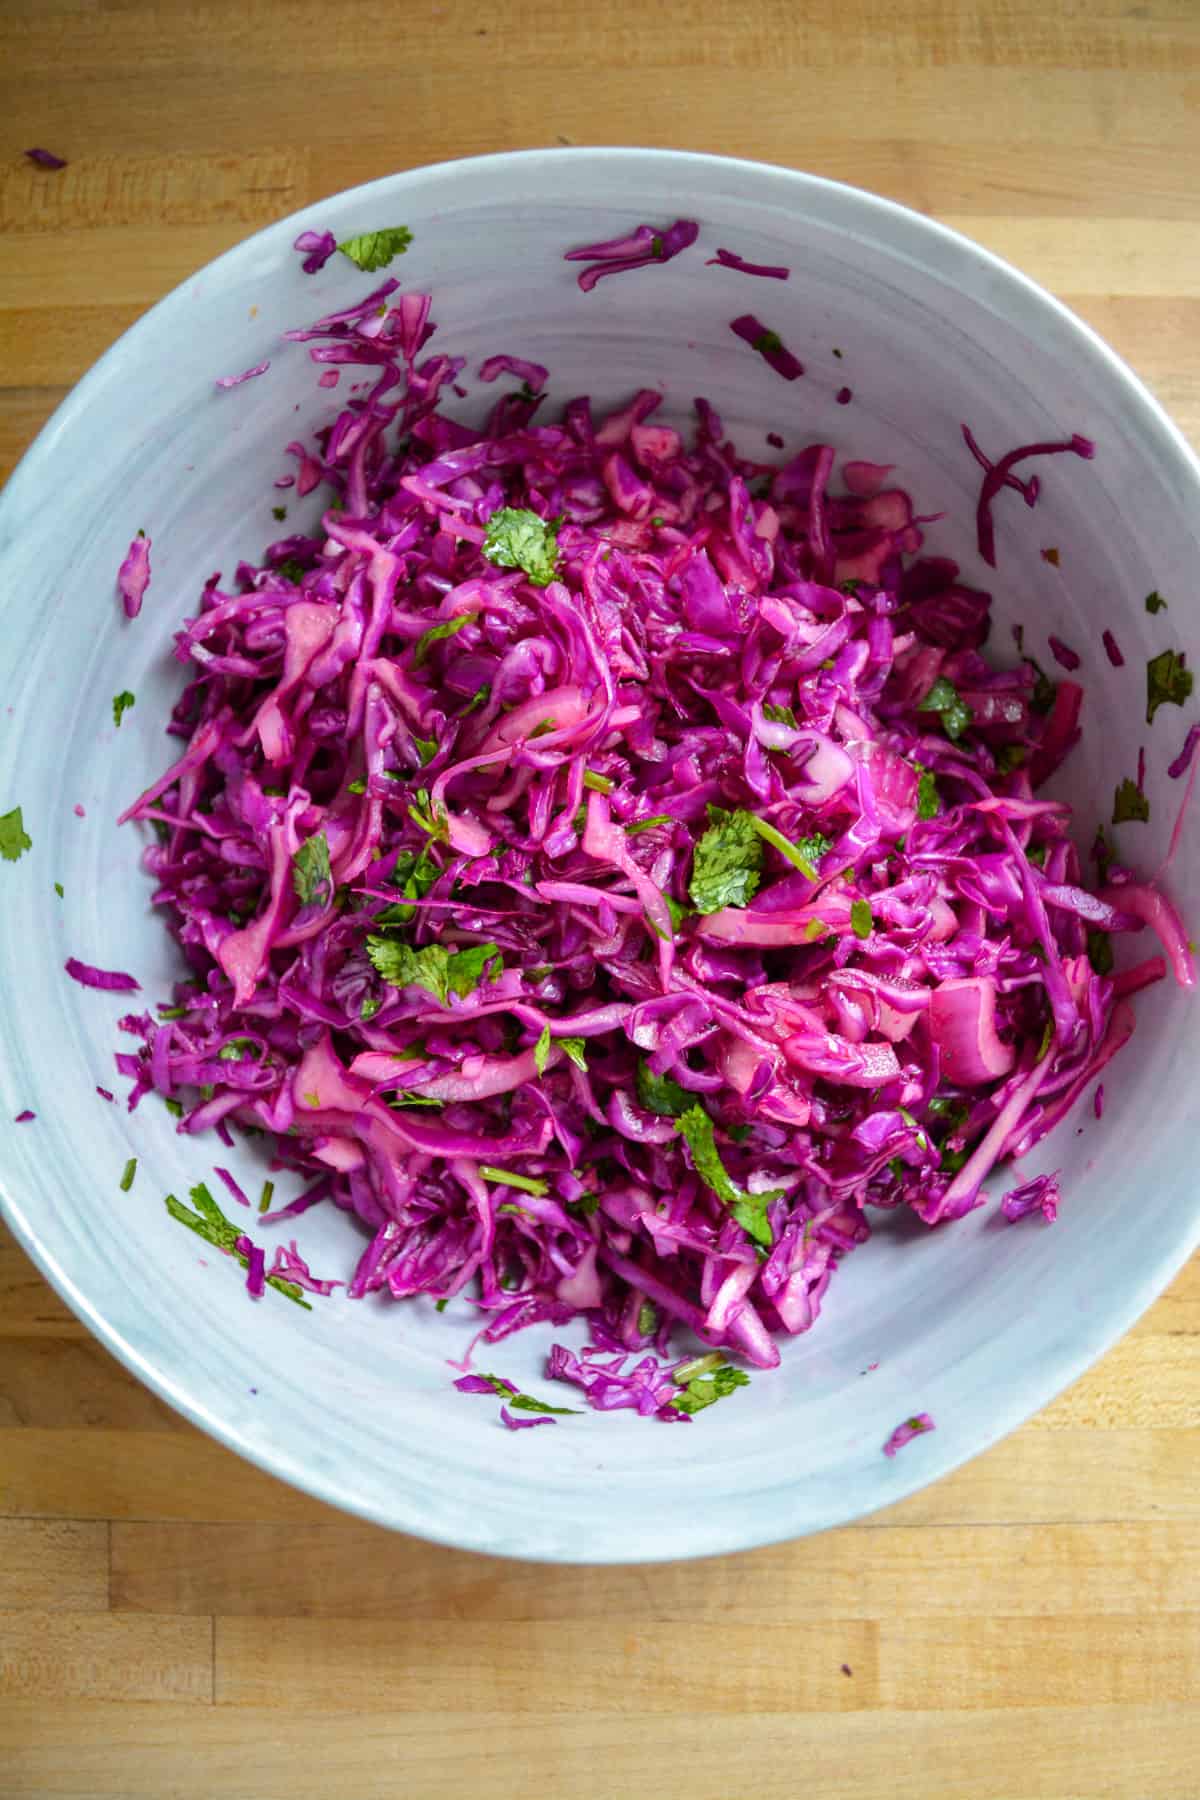 Finished red cabbage slaw in a marble bowl ready to top tacos.